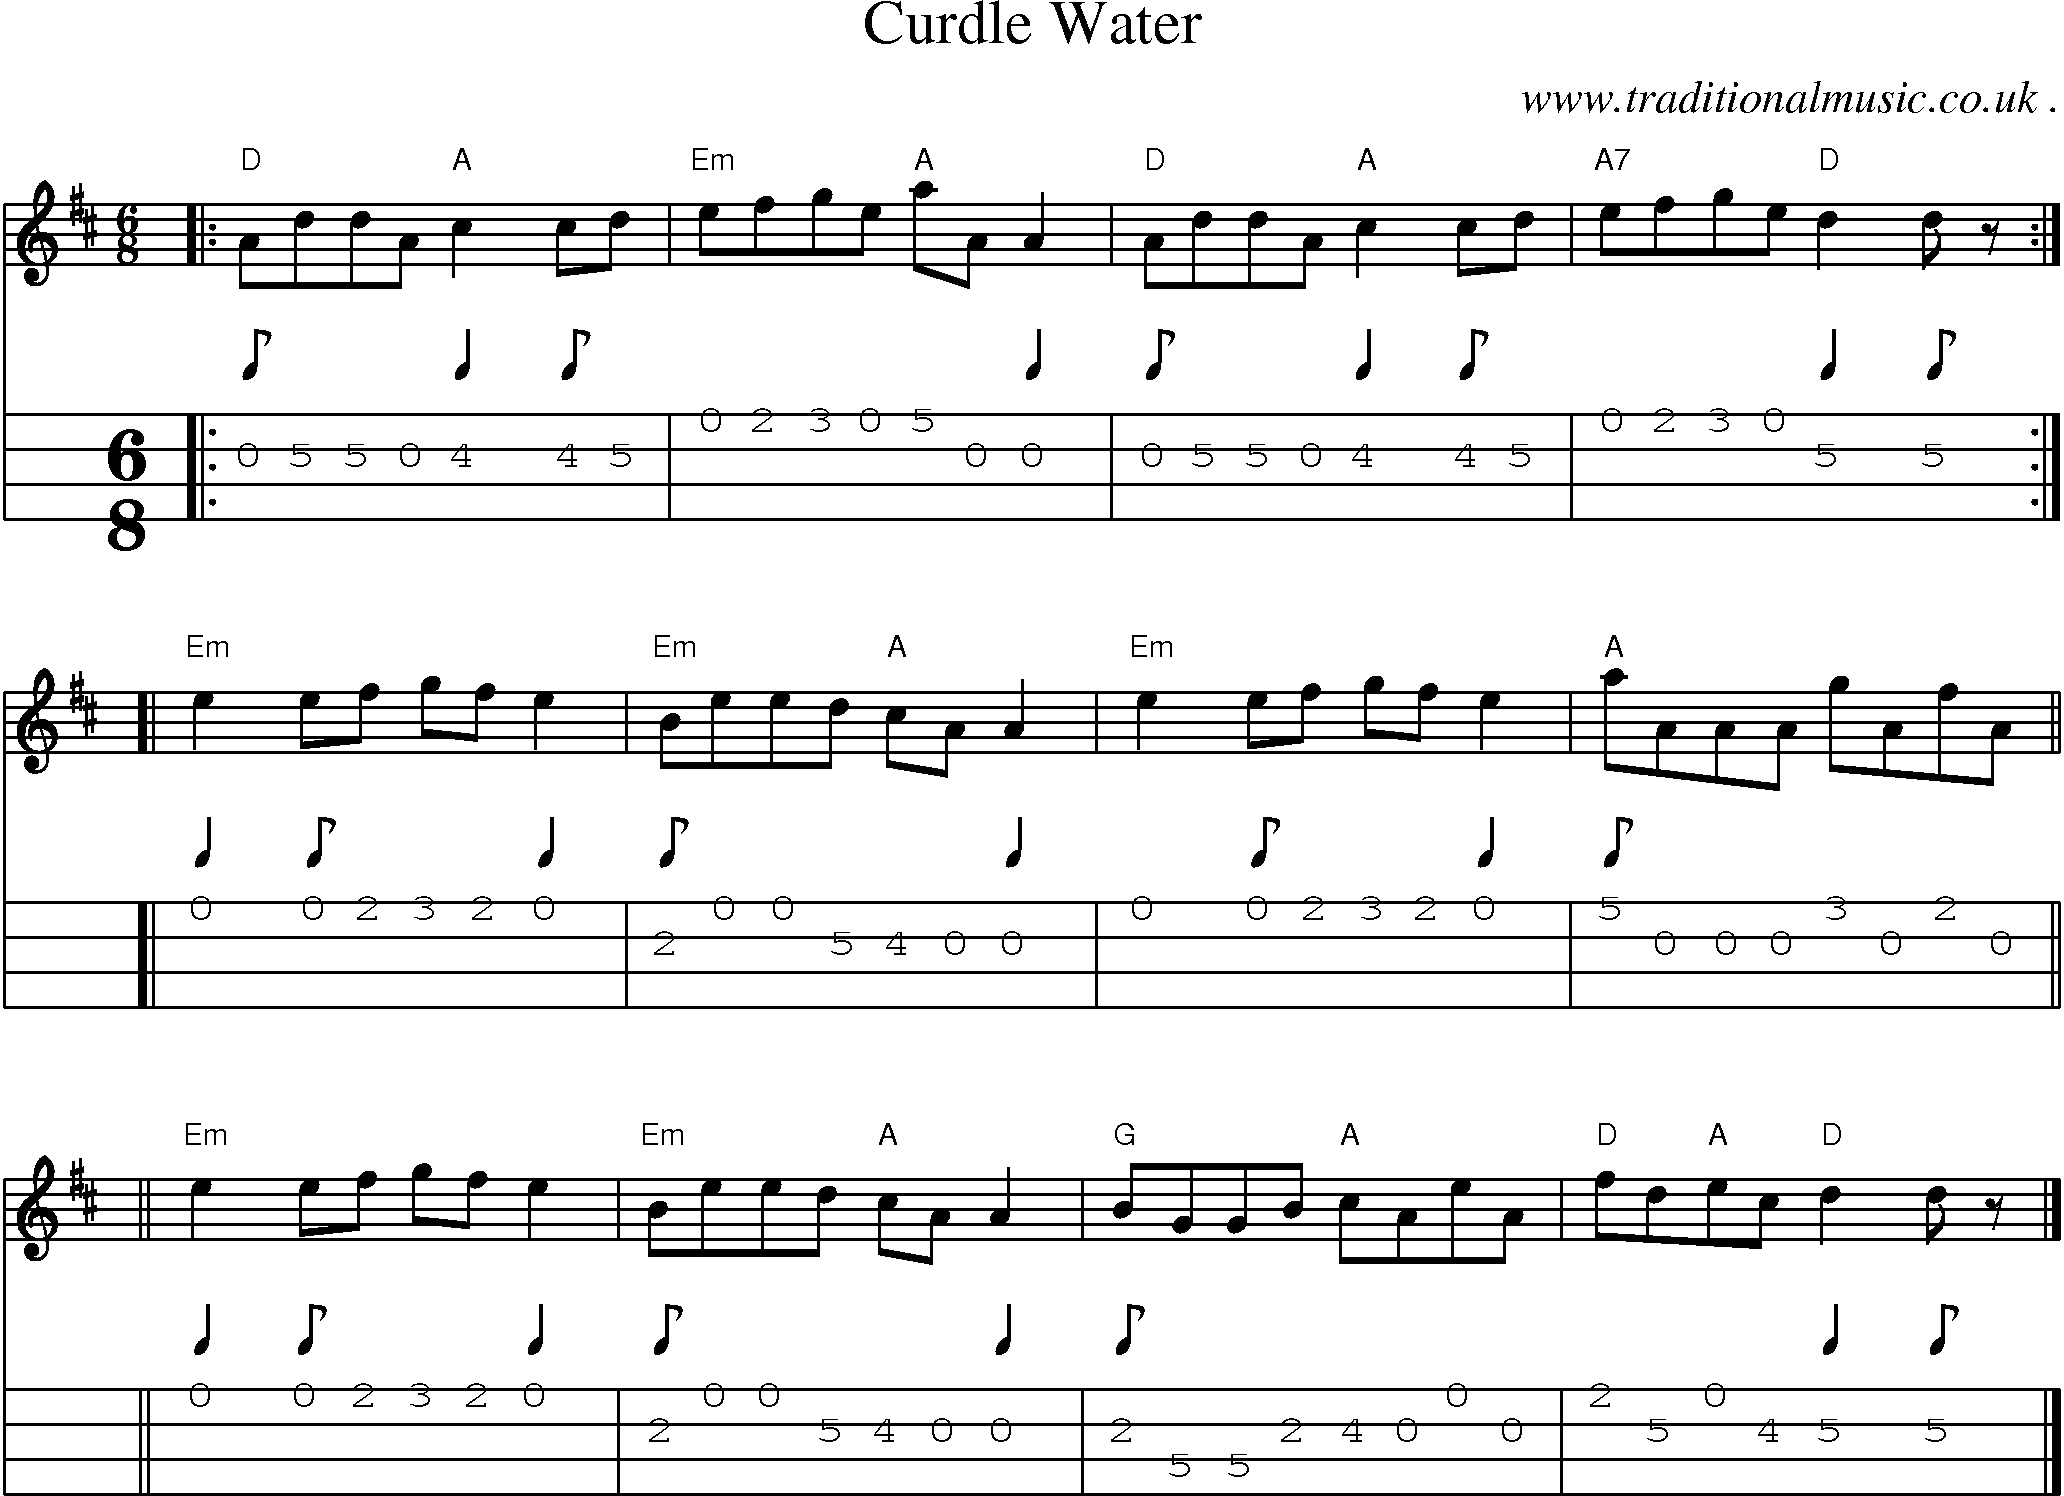 Sheet-music  score, Chords and Mandolin Tabs for Curdle Water